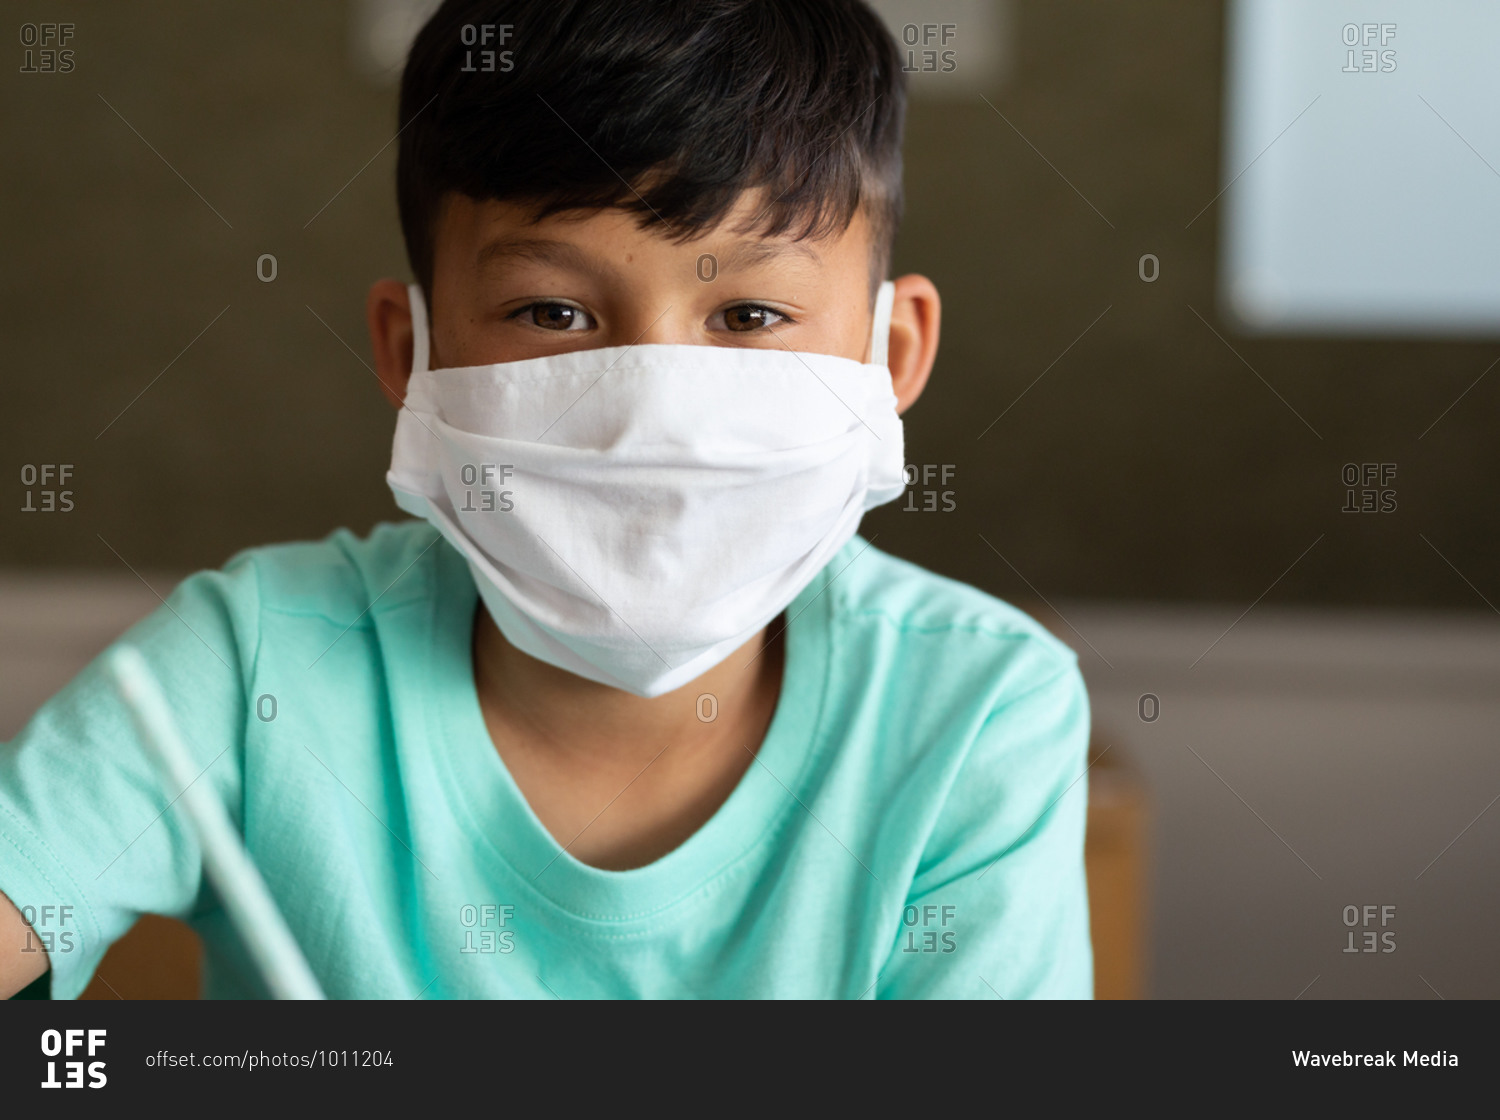 Portrait of an Asian boy sitting at desk wearing face mask in classroom. Primary education social distancing health safety during Covid19 Coronavirus pandemic.